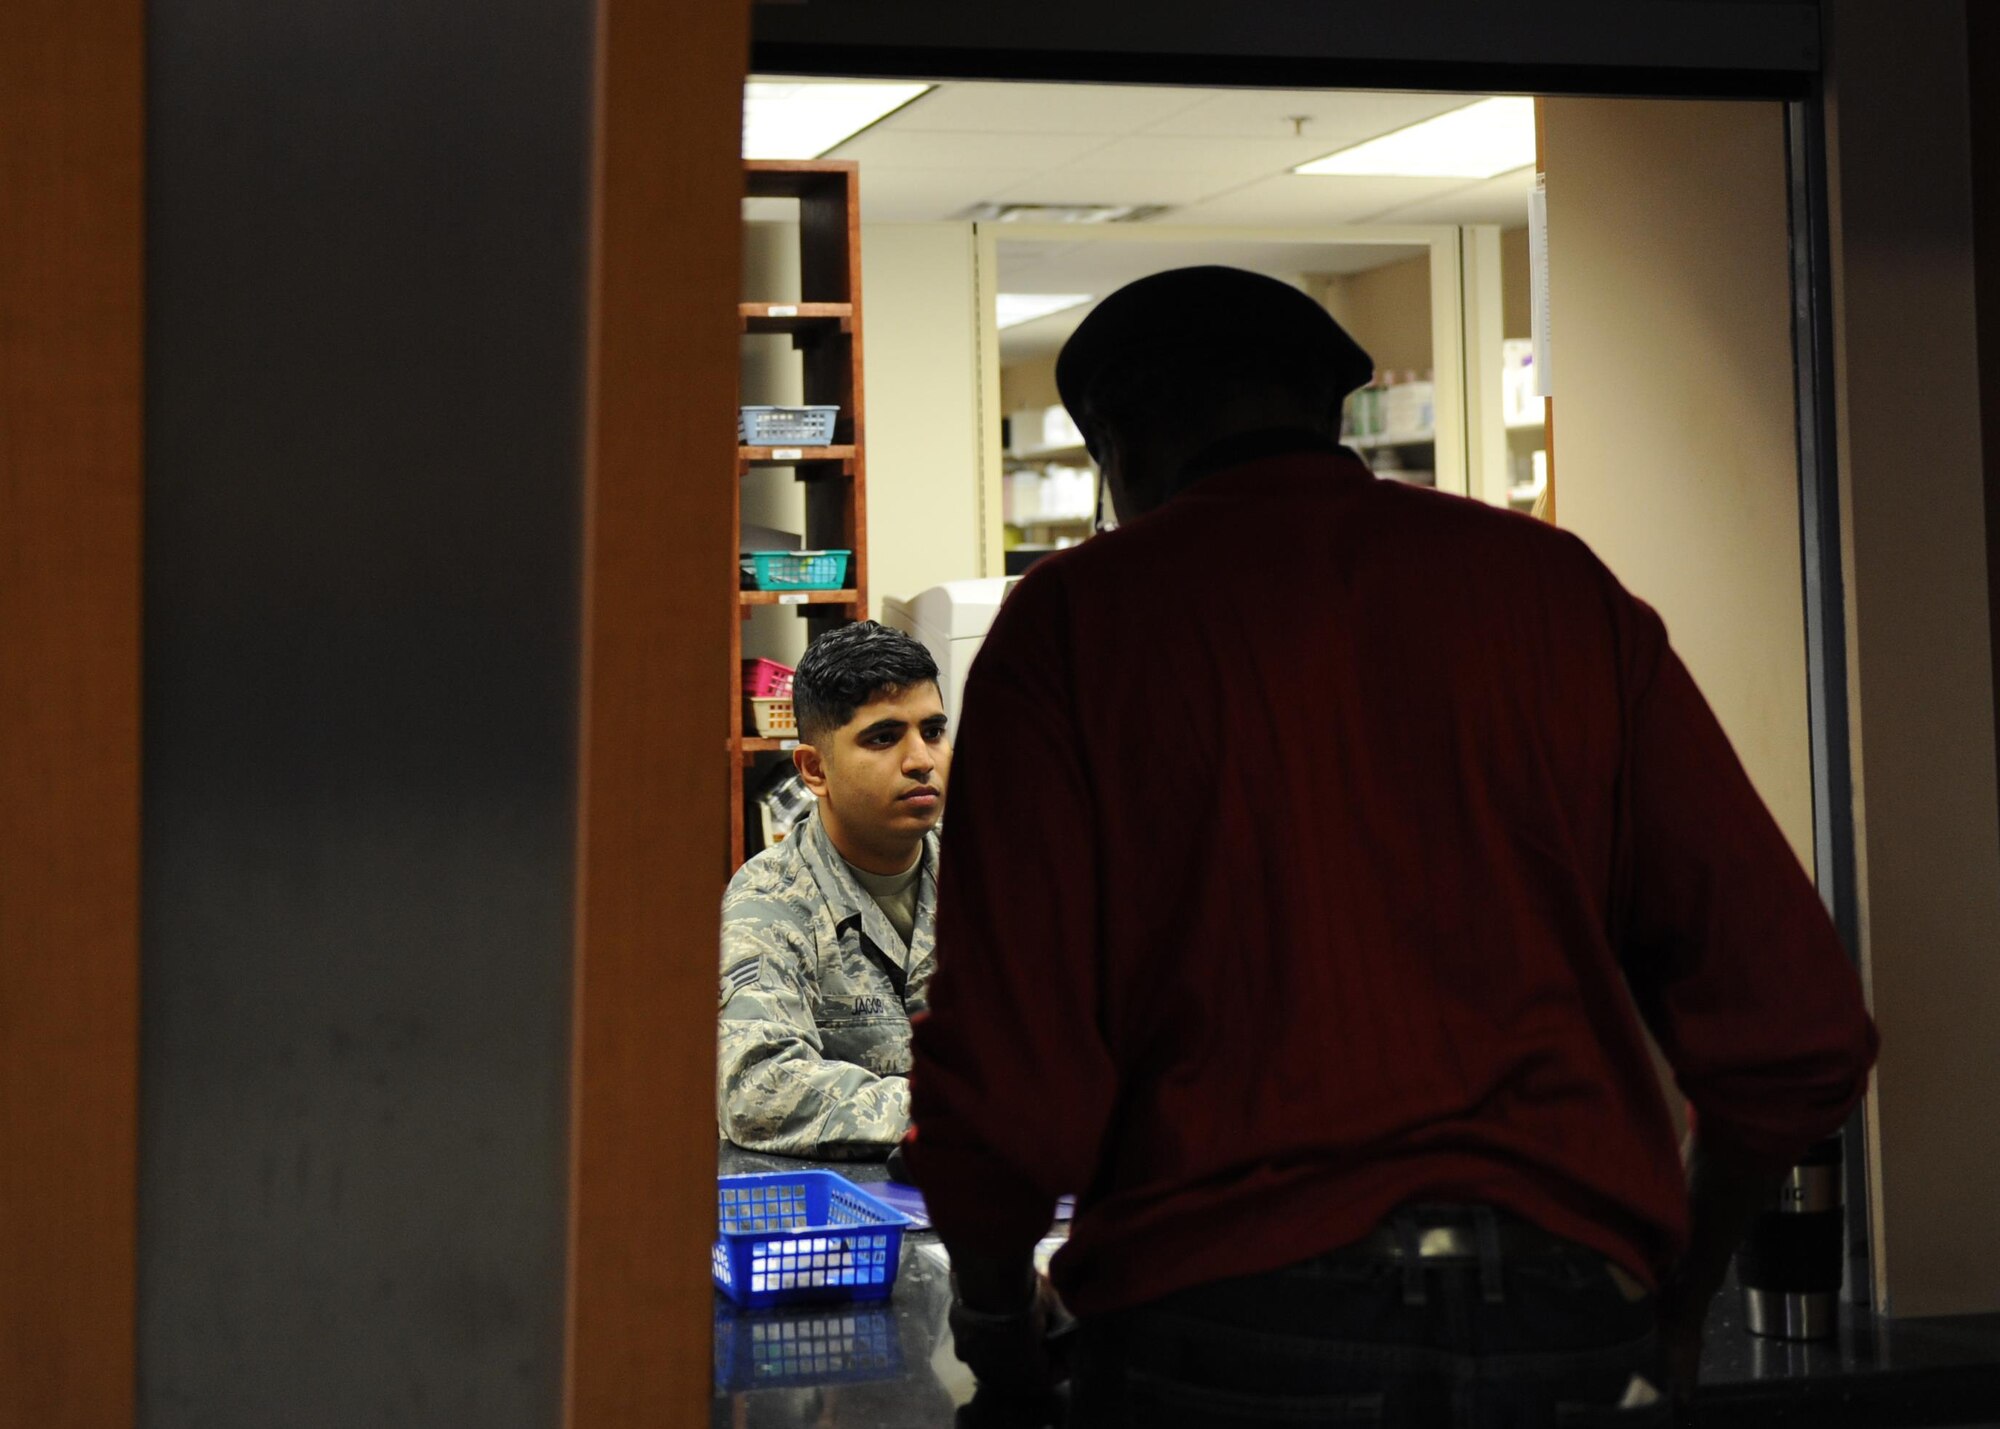 U.S. Air Force Senior Airman Sudeep Jacob, 19th Medical Group pharmacy technician, caters to a customer’s needs Jan. 12, 2017, at the 19th MDG pharmacy on Little Rock Air Force Base, Ark. The pharmacy assists more than 500 patients daily. (U.S. Air Force photo by Airman 1st Class Grace Nichols)